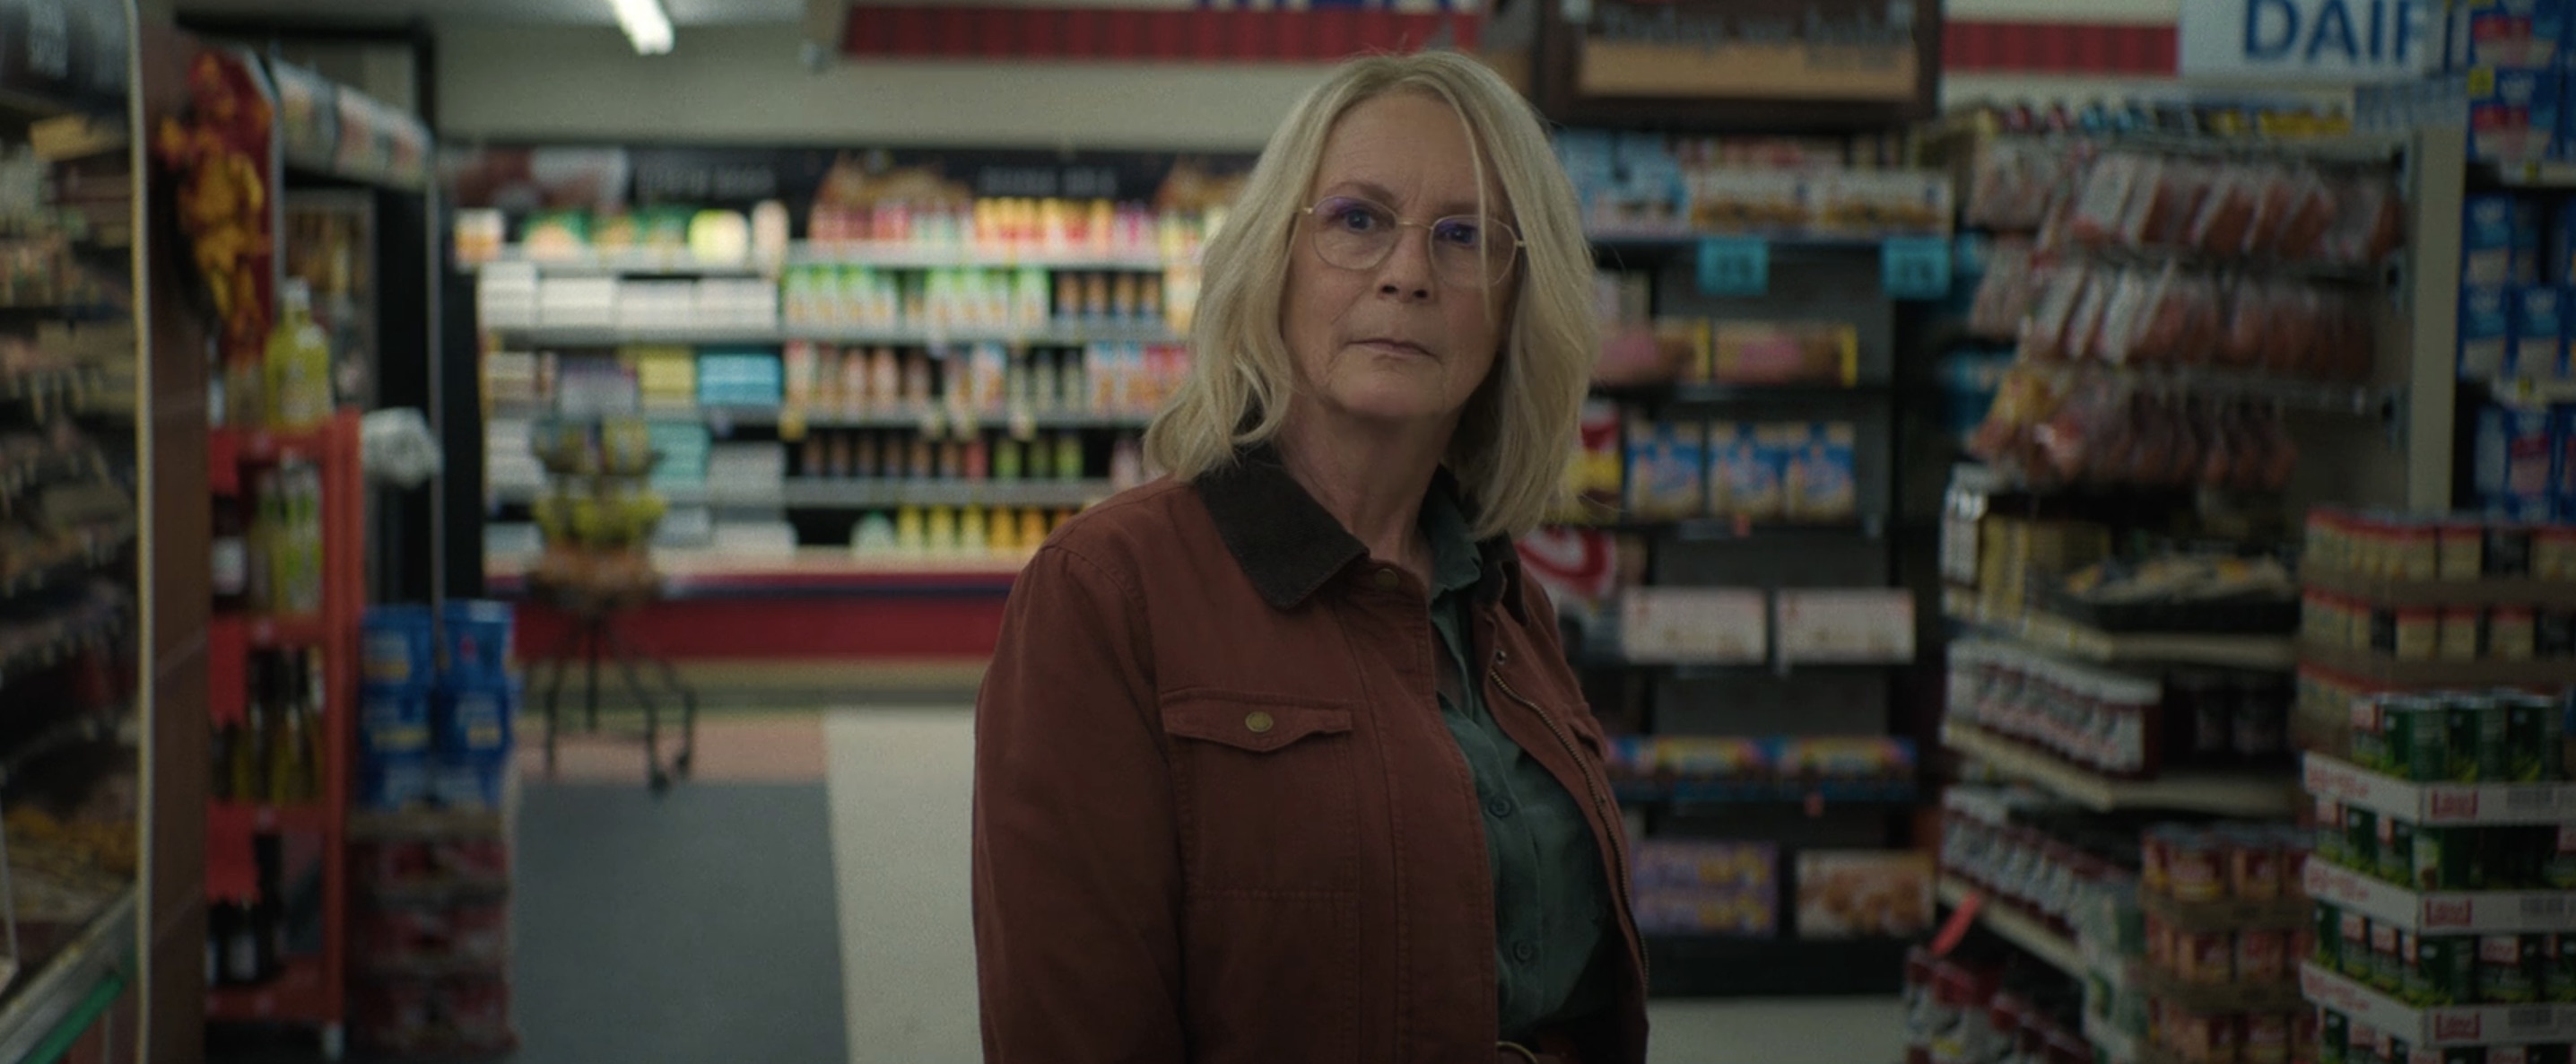 Halloween Ends Cast on Peacock - Jamie Lee Curtis as Laurie Strode 